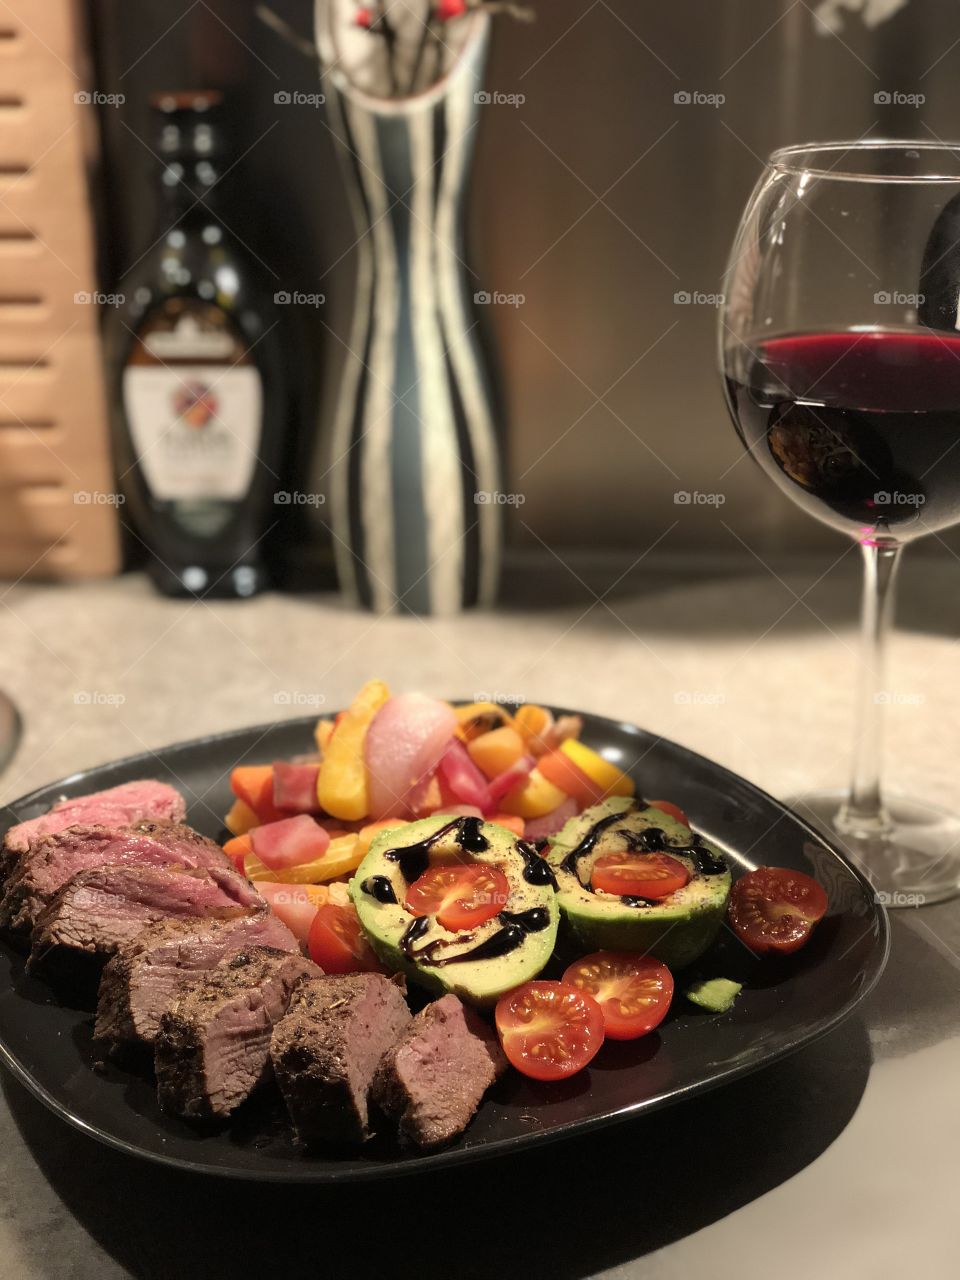 Amazing lamb loin cooked with sousvide, served with some roasted vegetables and avocado